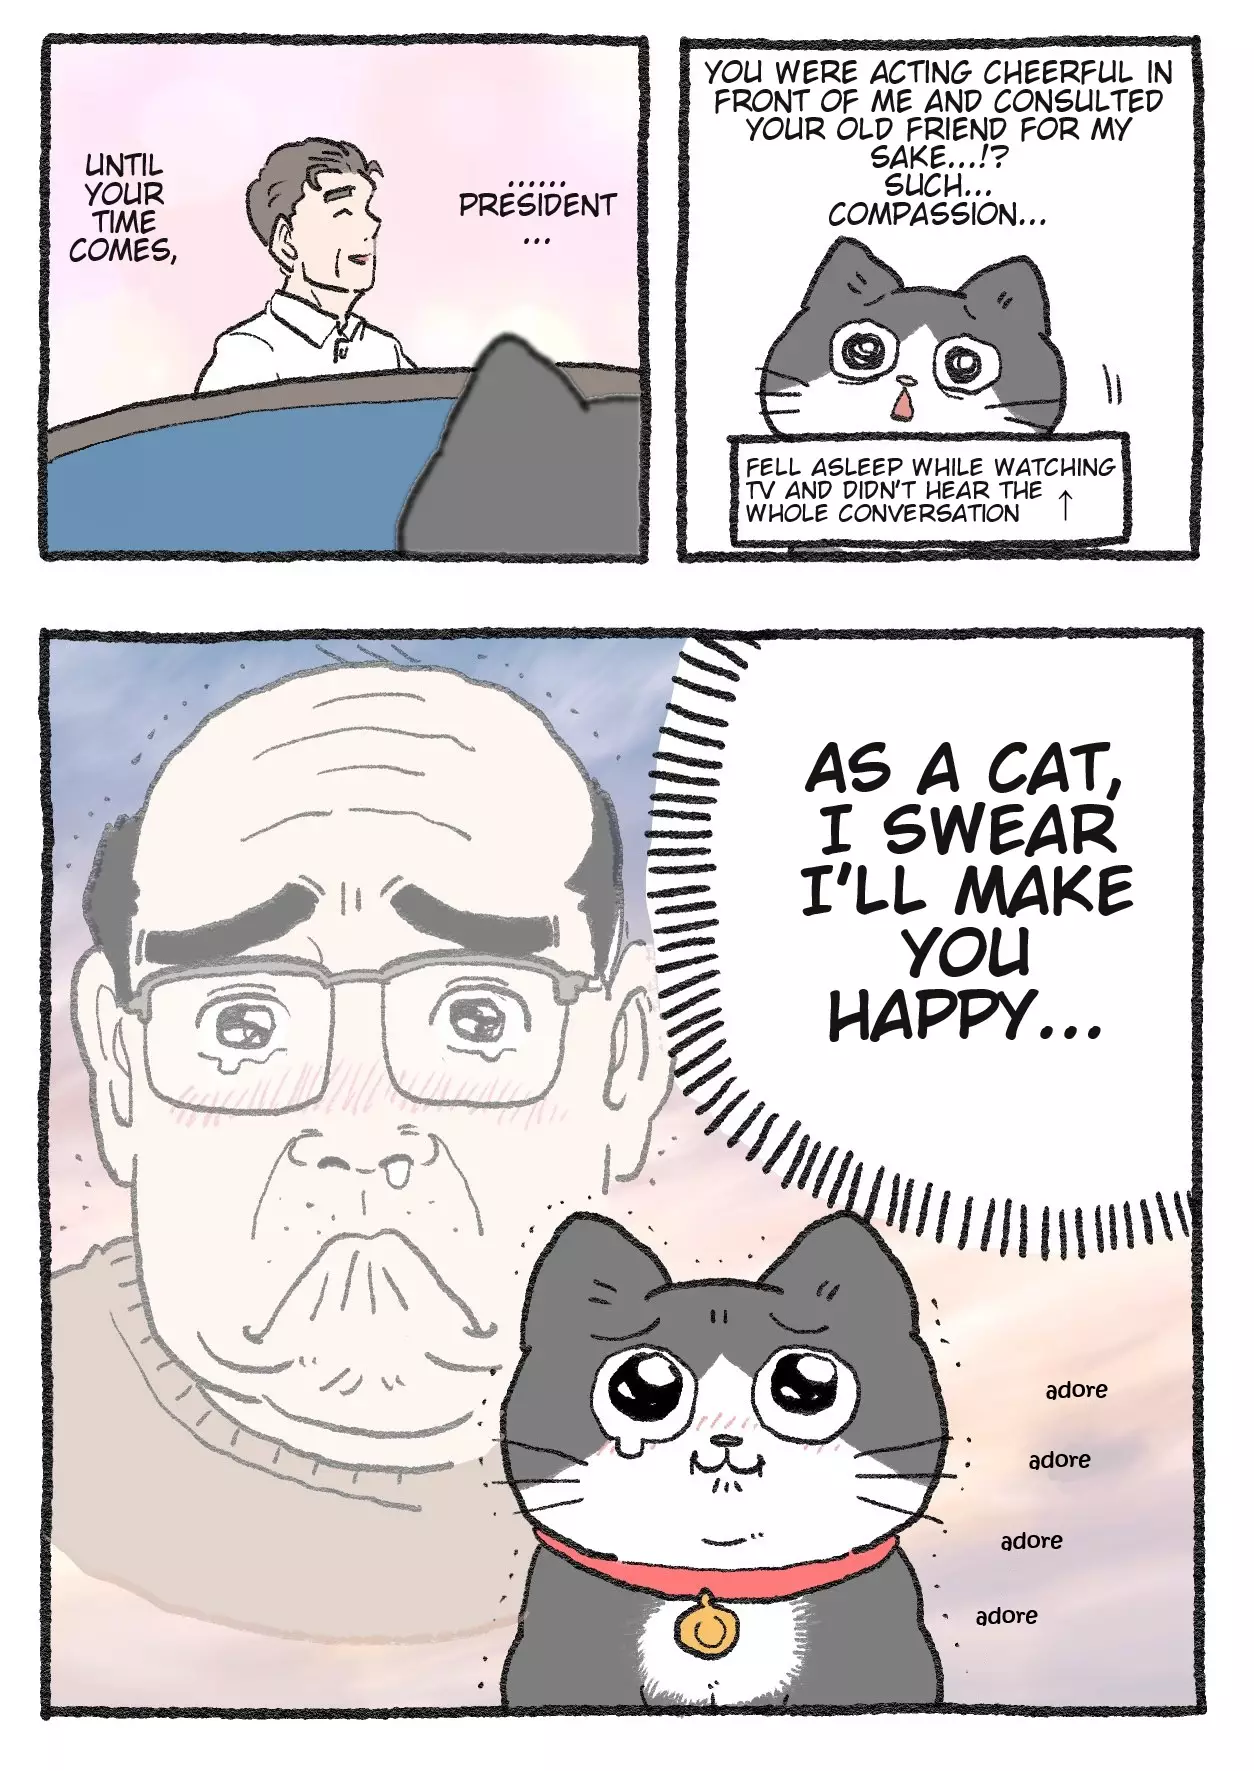 The Old Man Who Was Reincarnated As A Cat - 302 page 2-65c5ef1d